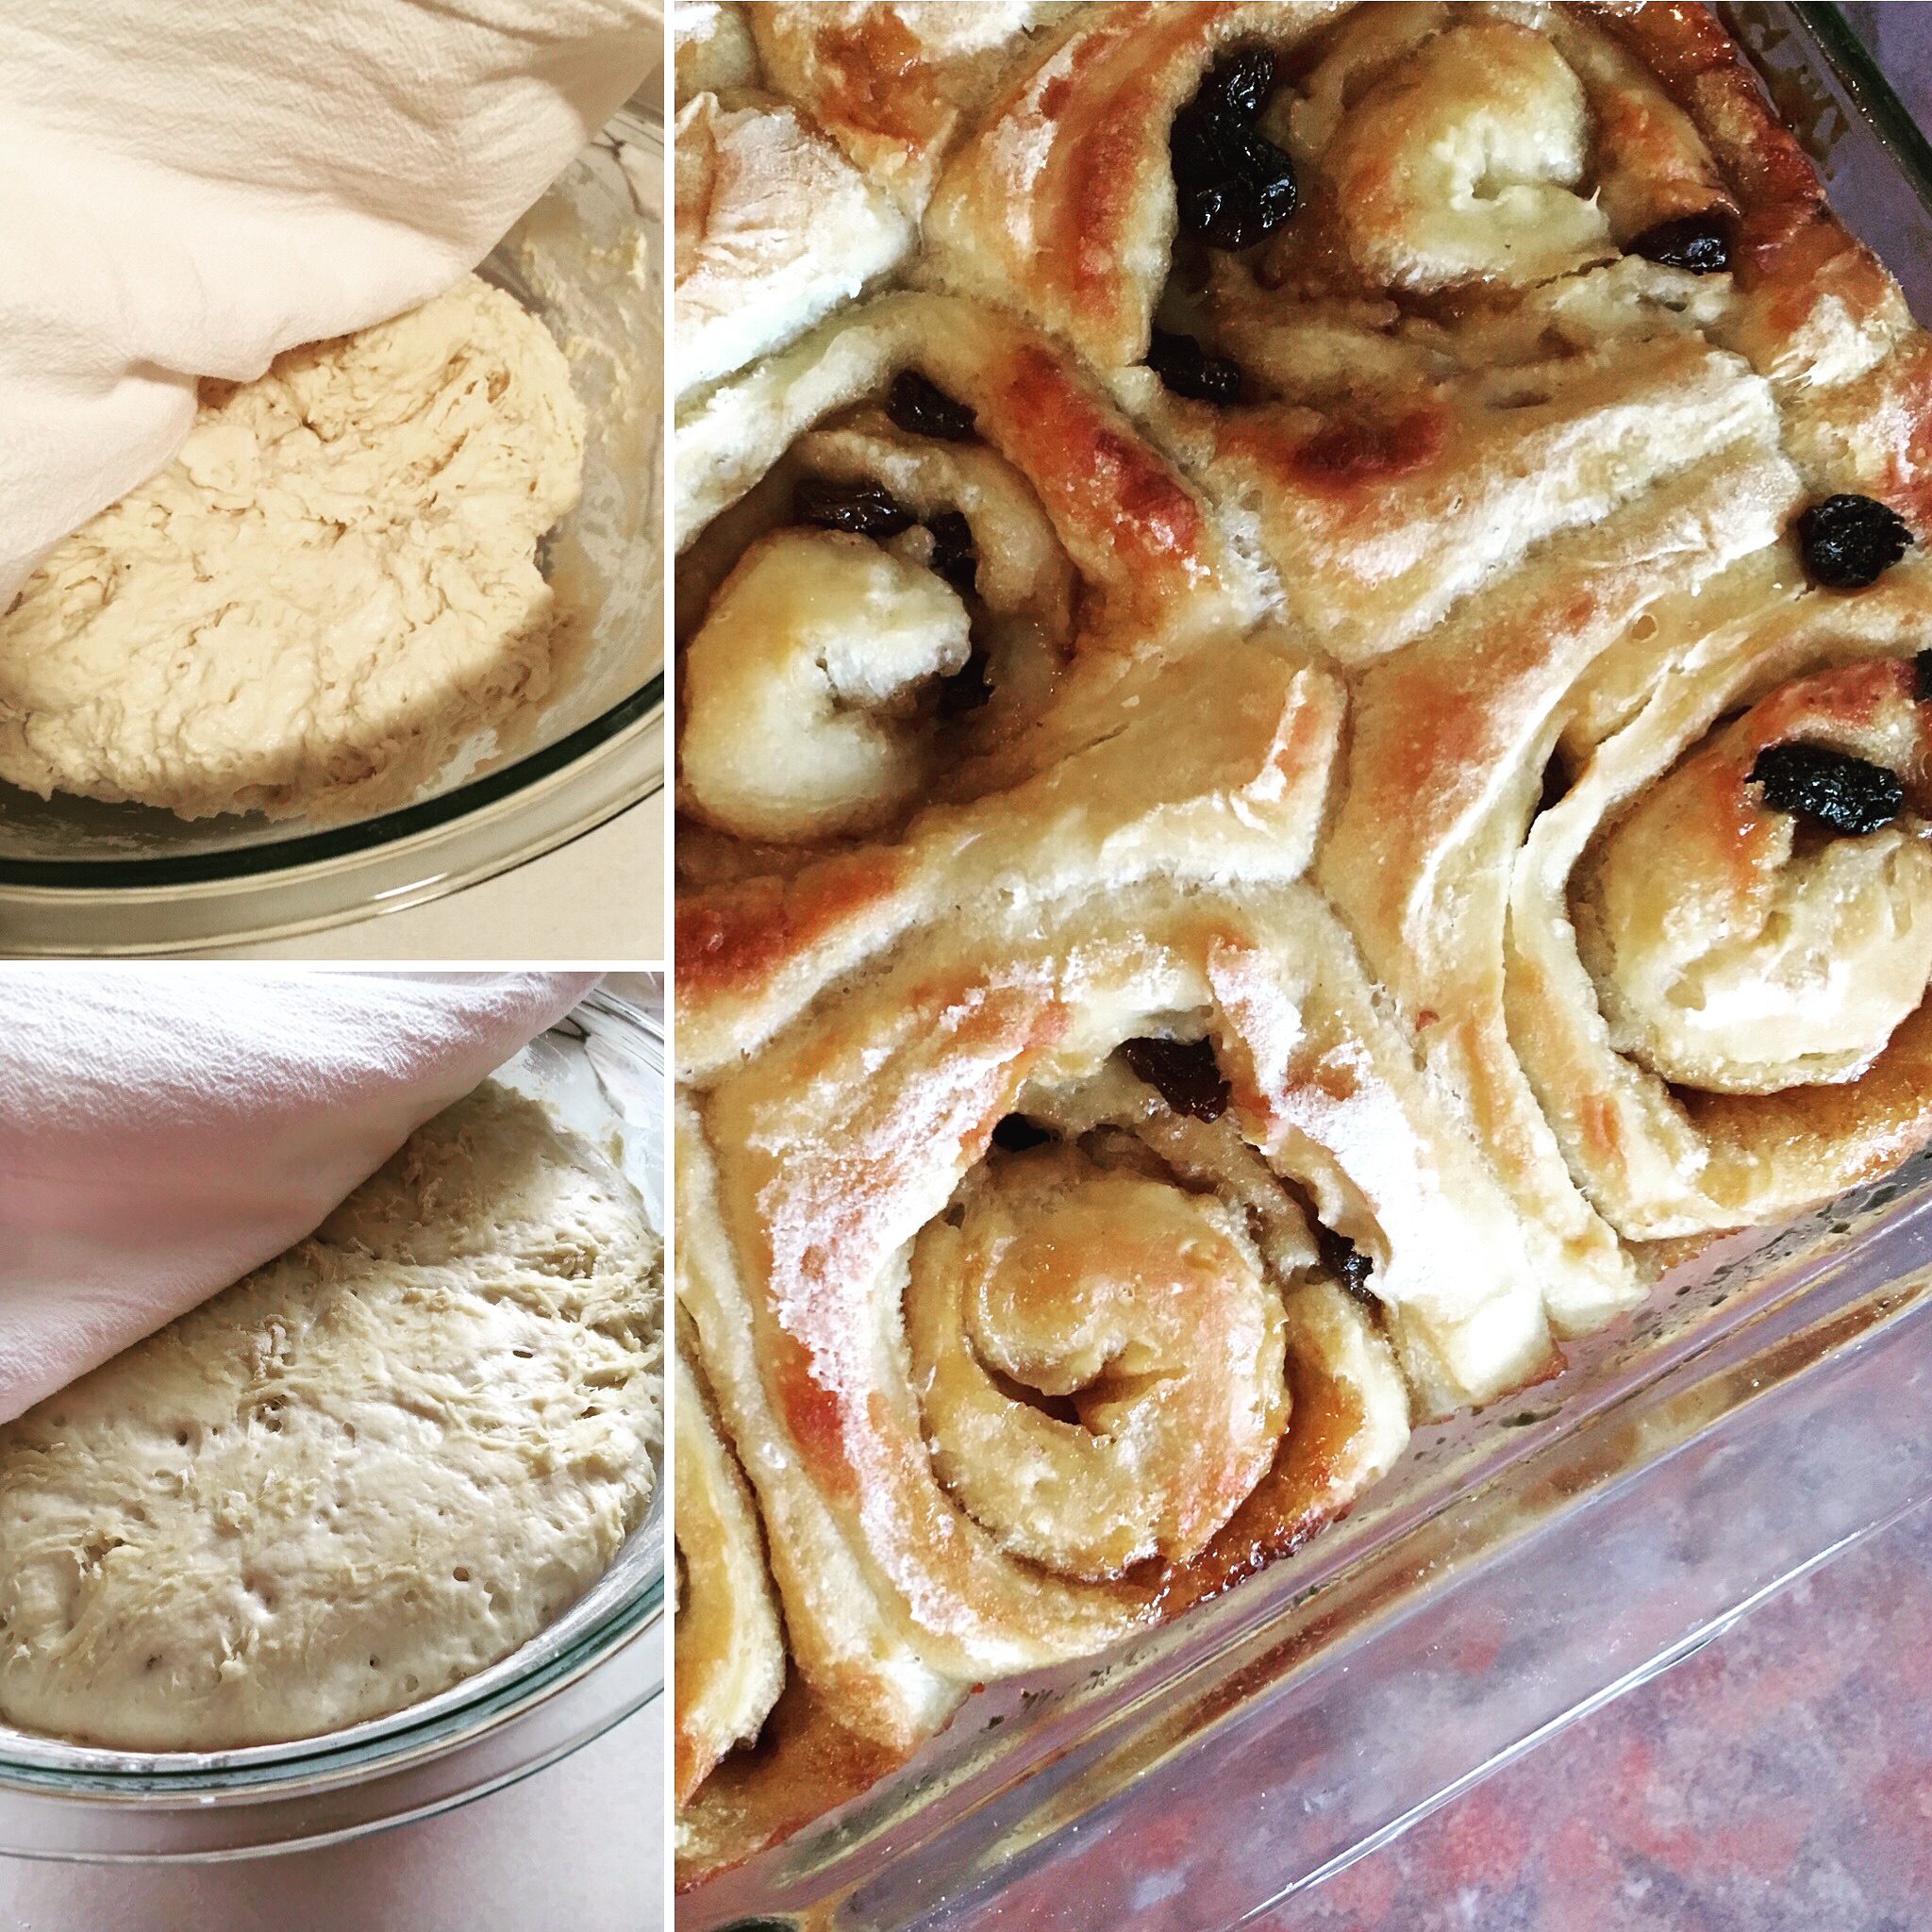 Sourdough Cinnamon Rolls? Yes, please! These are a treat, though - not to be eaten every day!